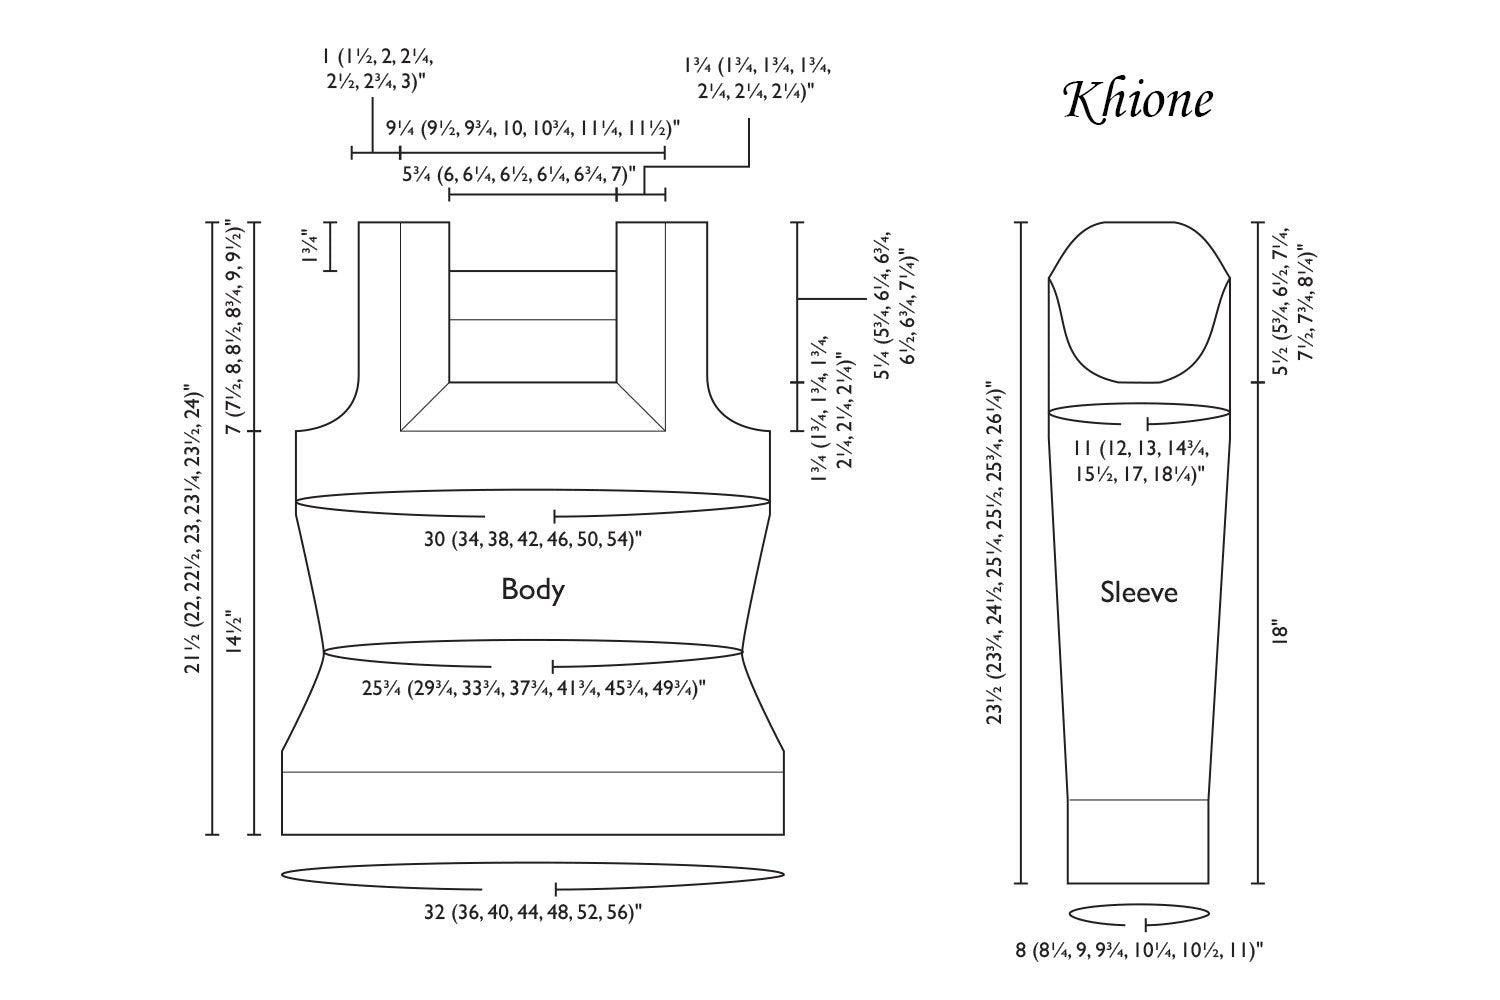 Detailed schematic line drawing with dimensions for Khione sweater